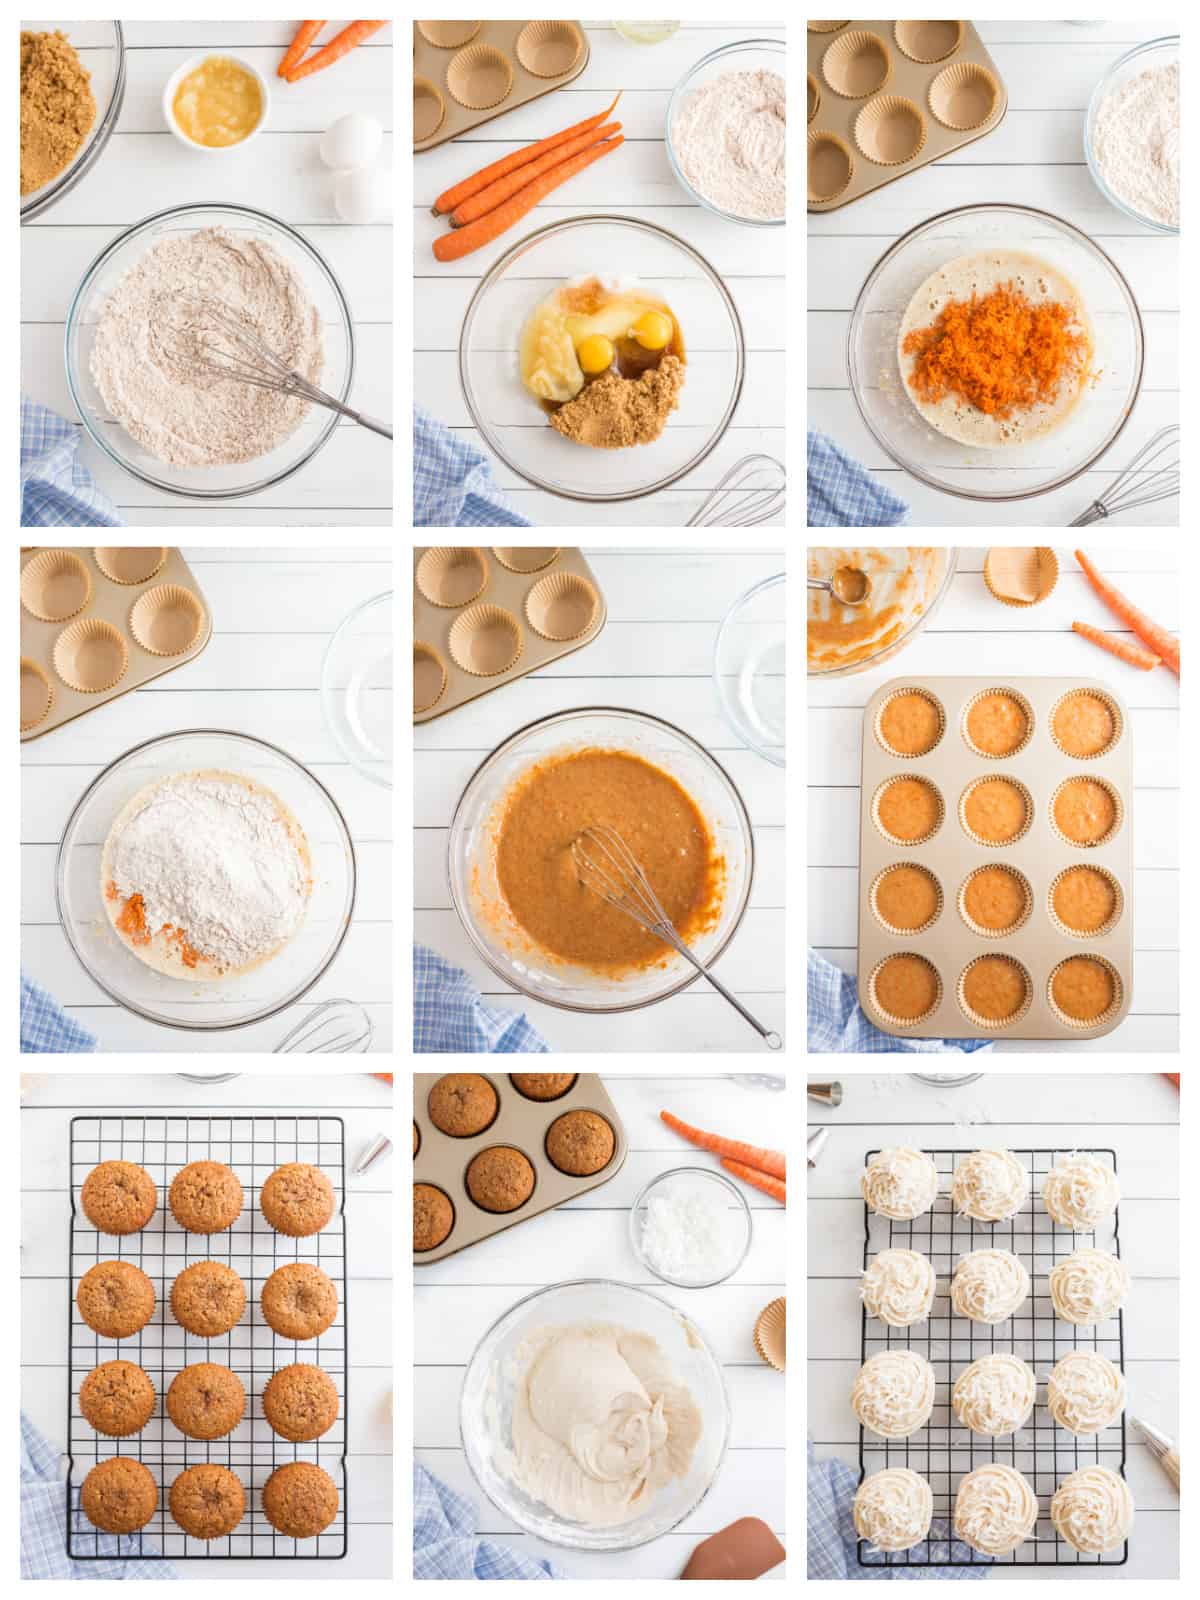 Step by step photos on how to make Carrot Cake Cupcakes.